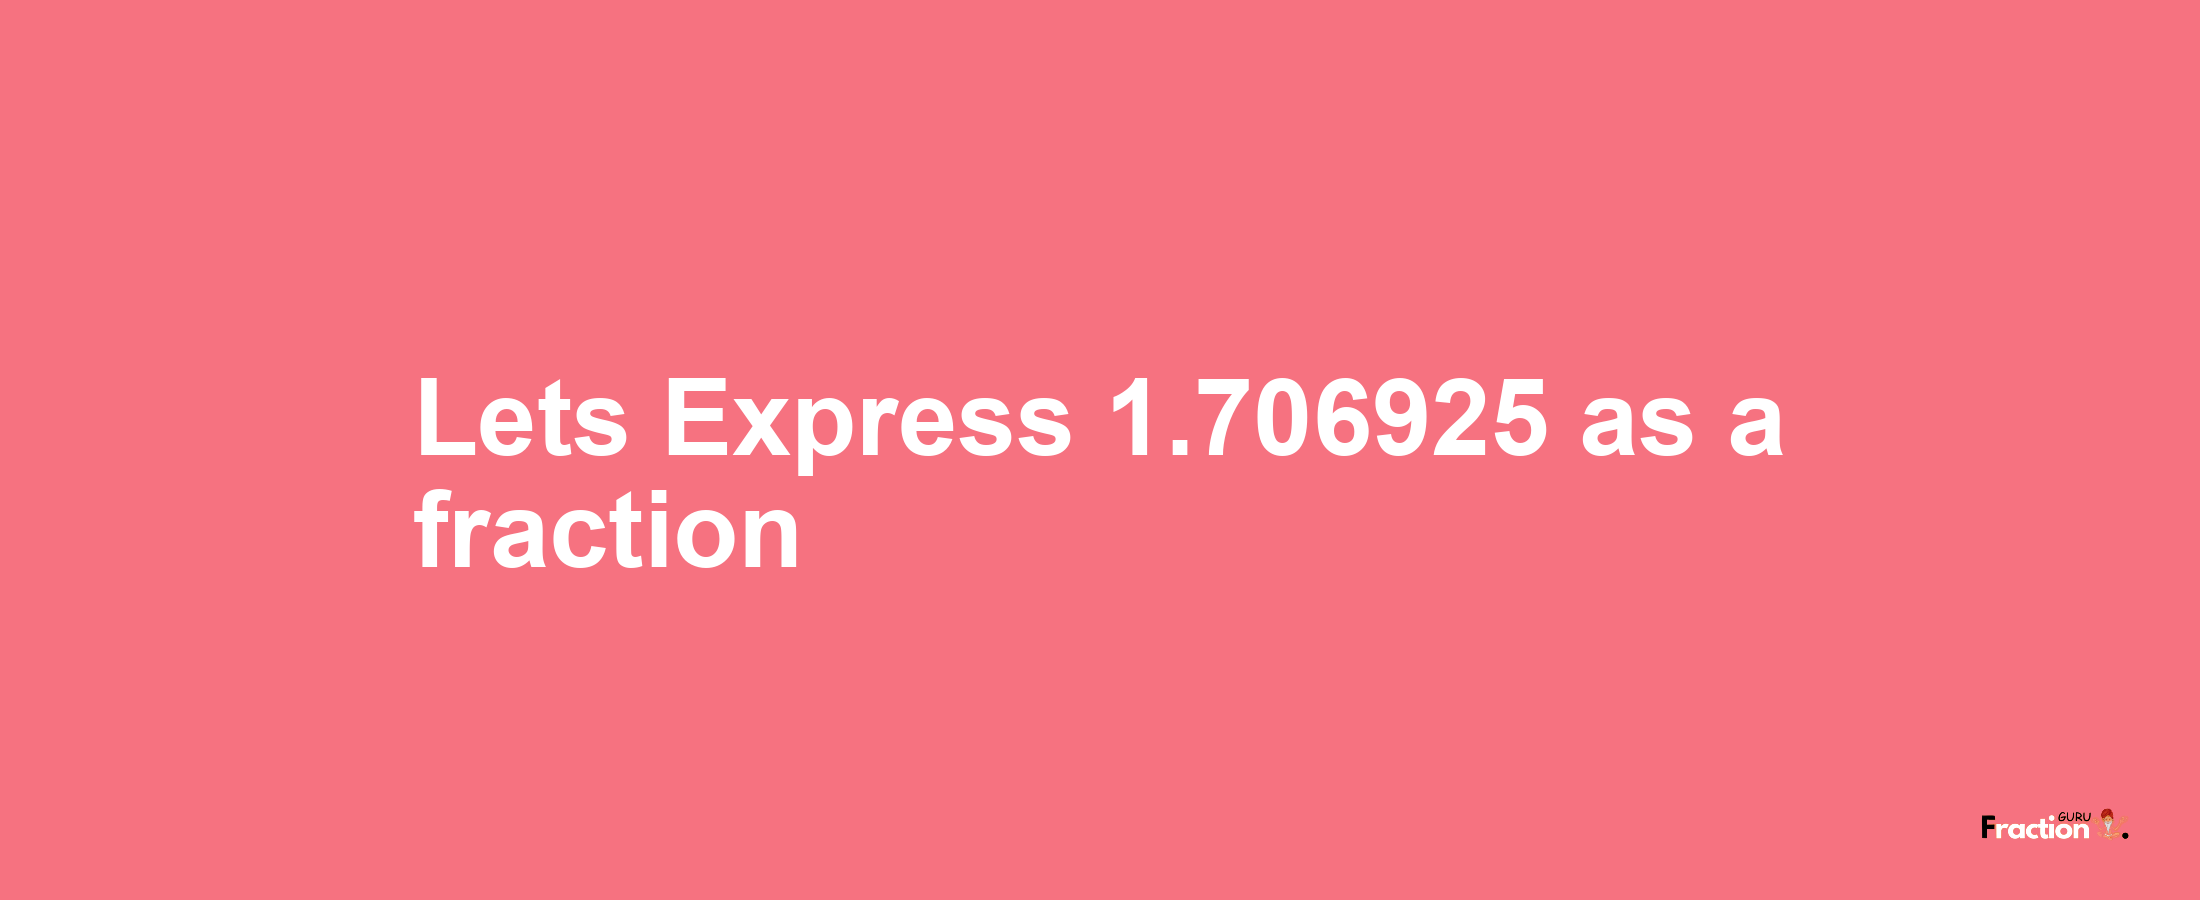 Lets Express 1.706925 as afraction